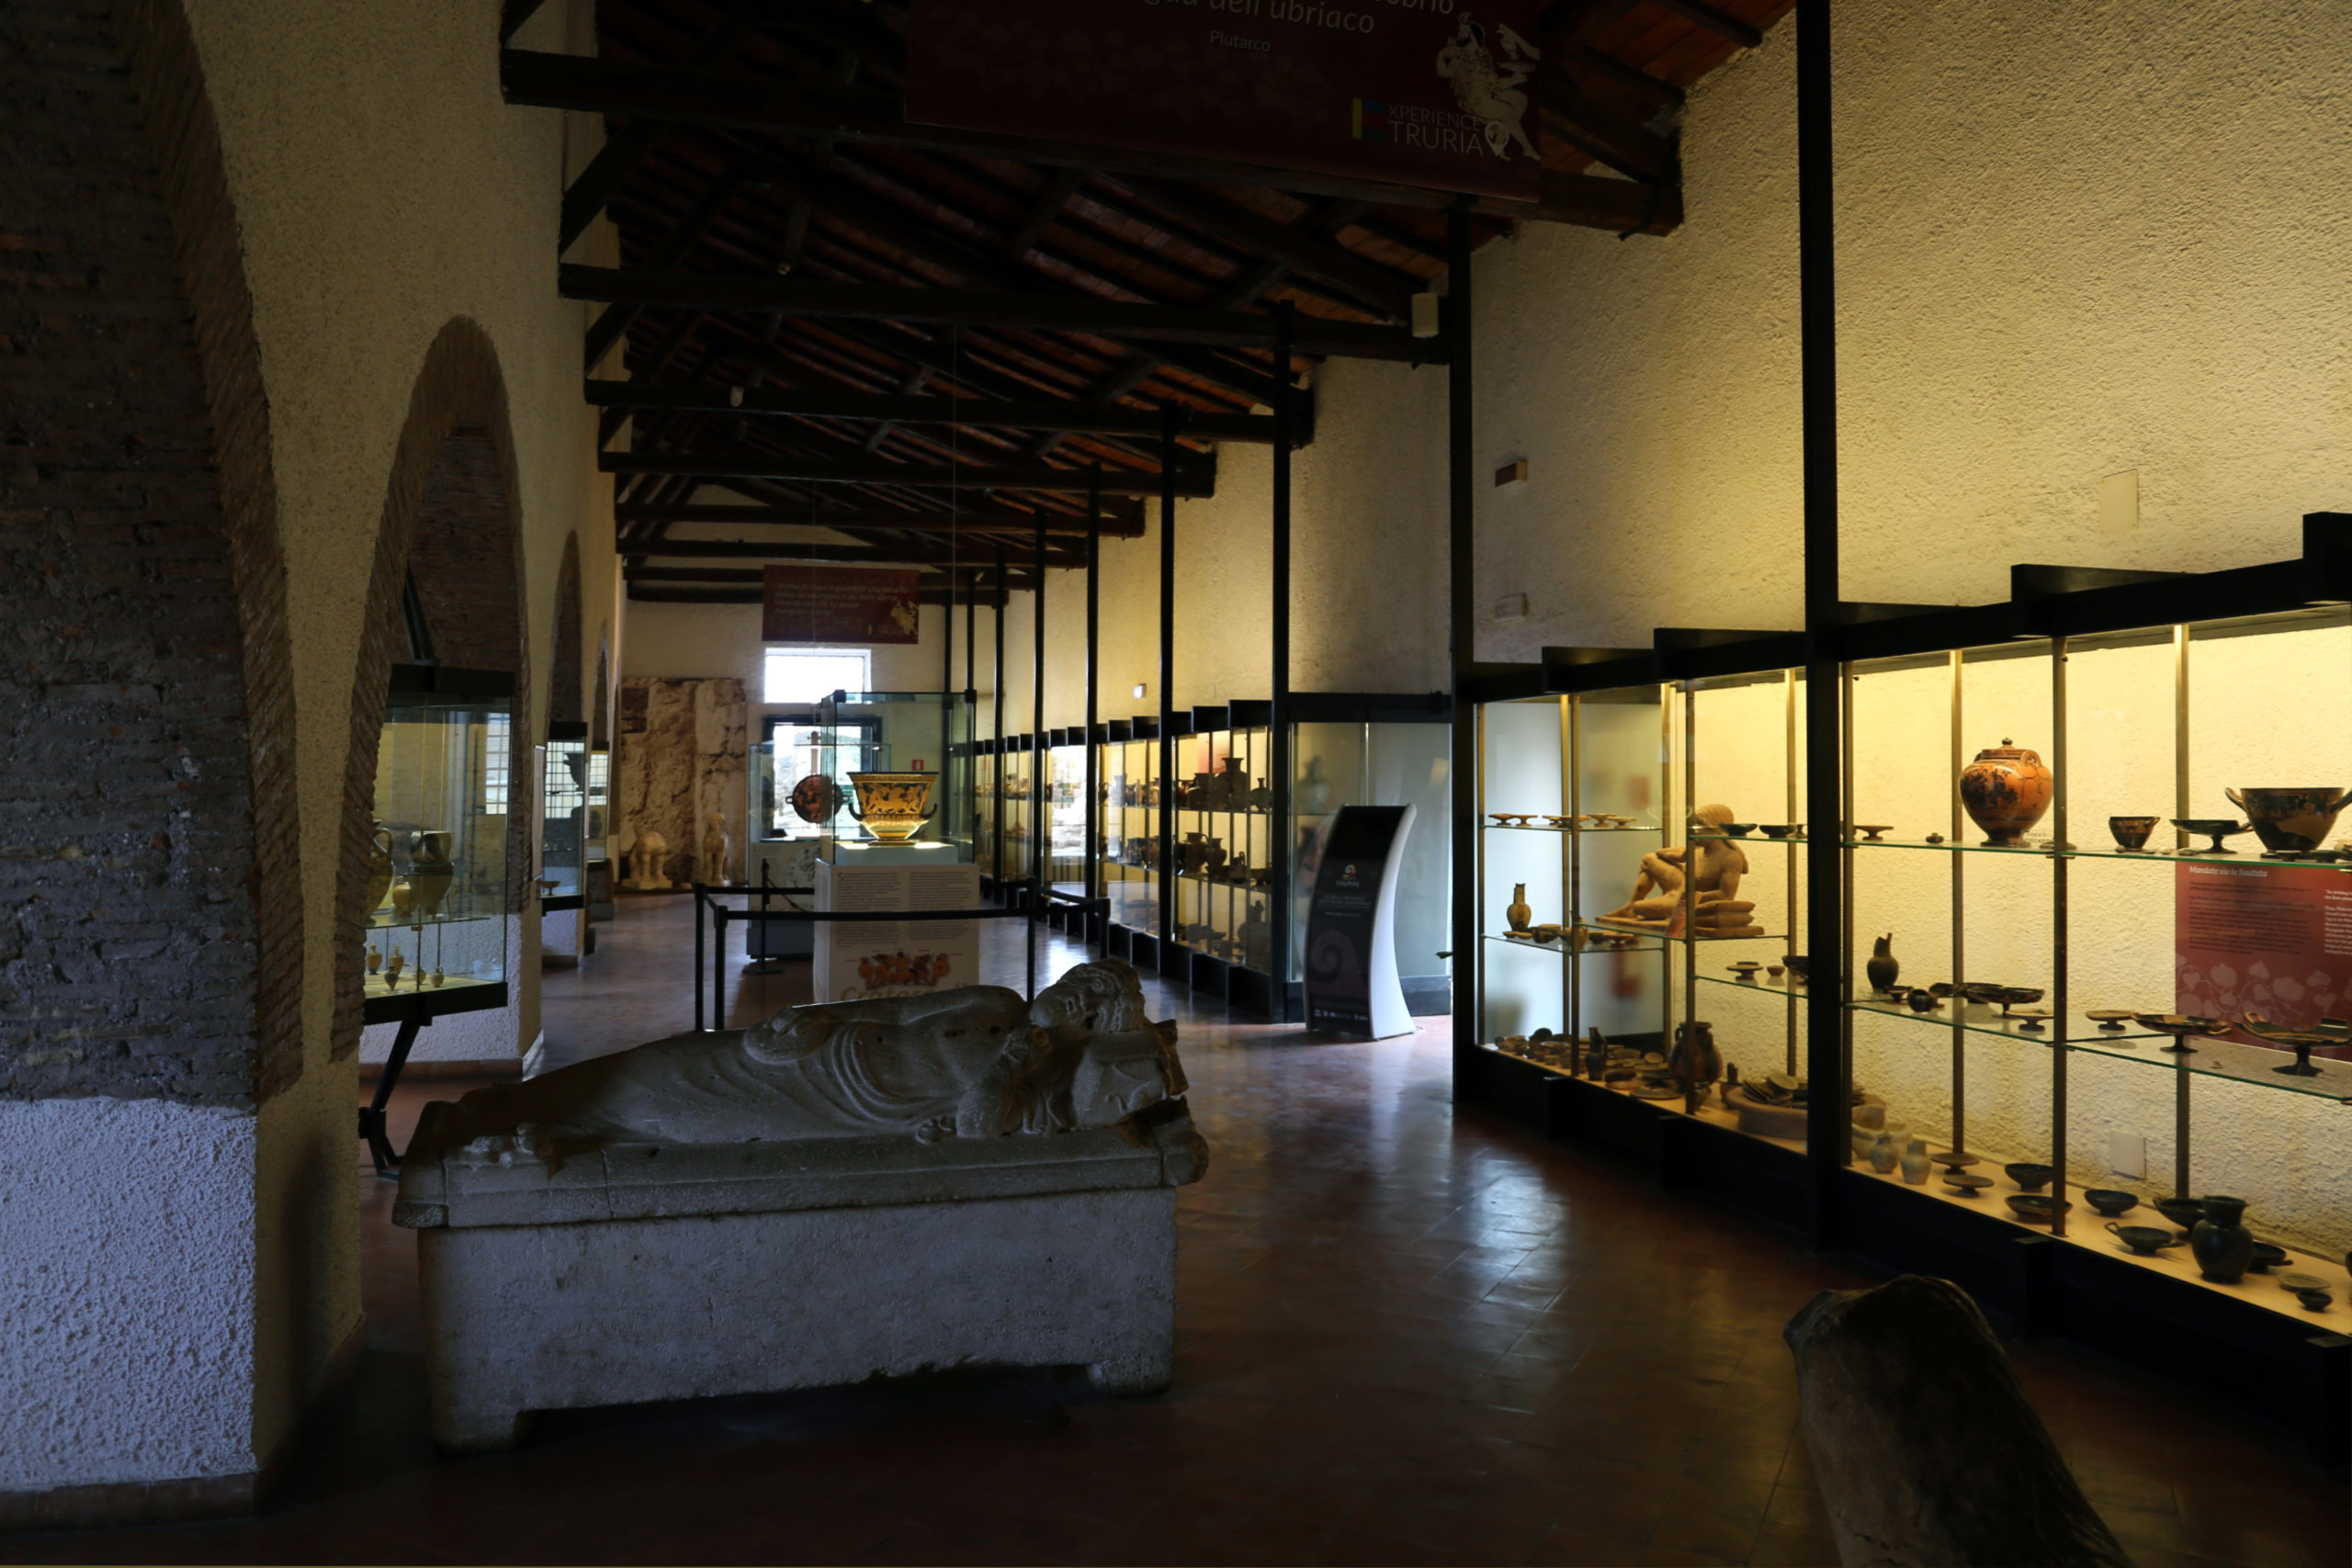 Interior of the National Archaeological Museum of Cerveteri (photo: Sailko, CC BY 3.0)